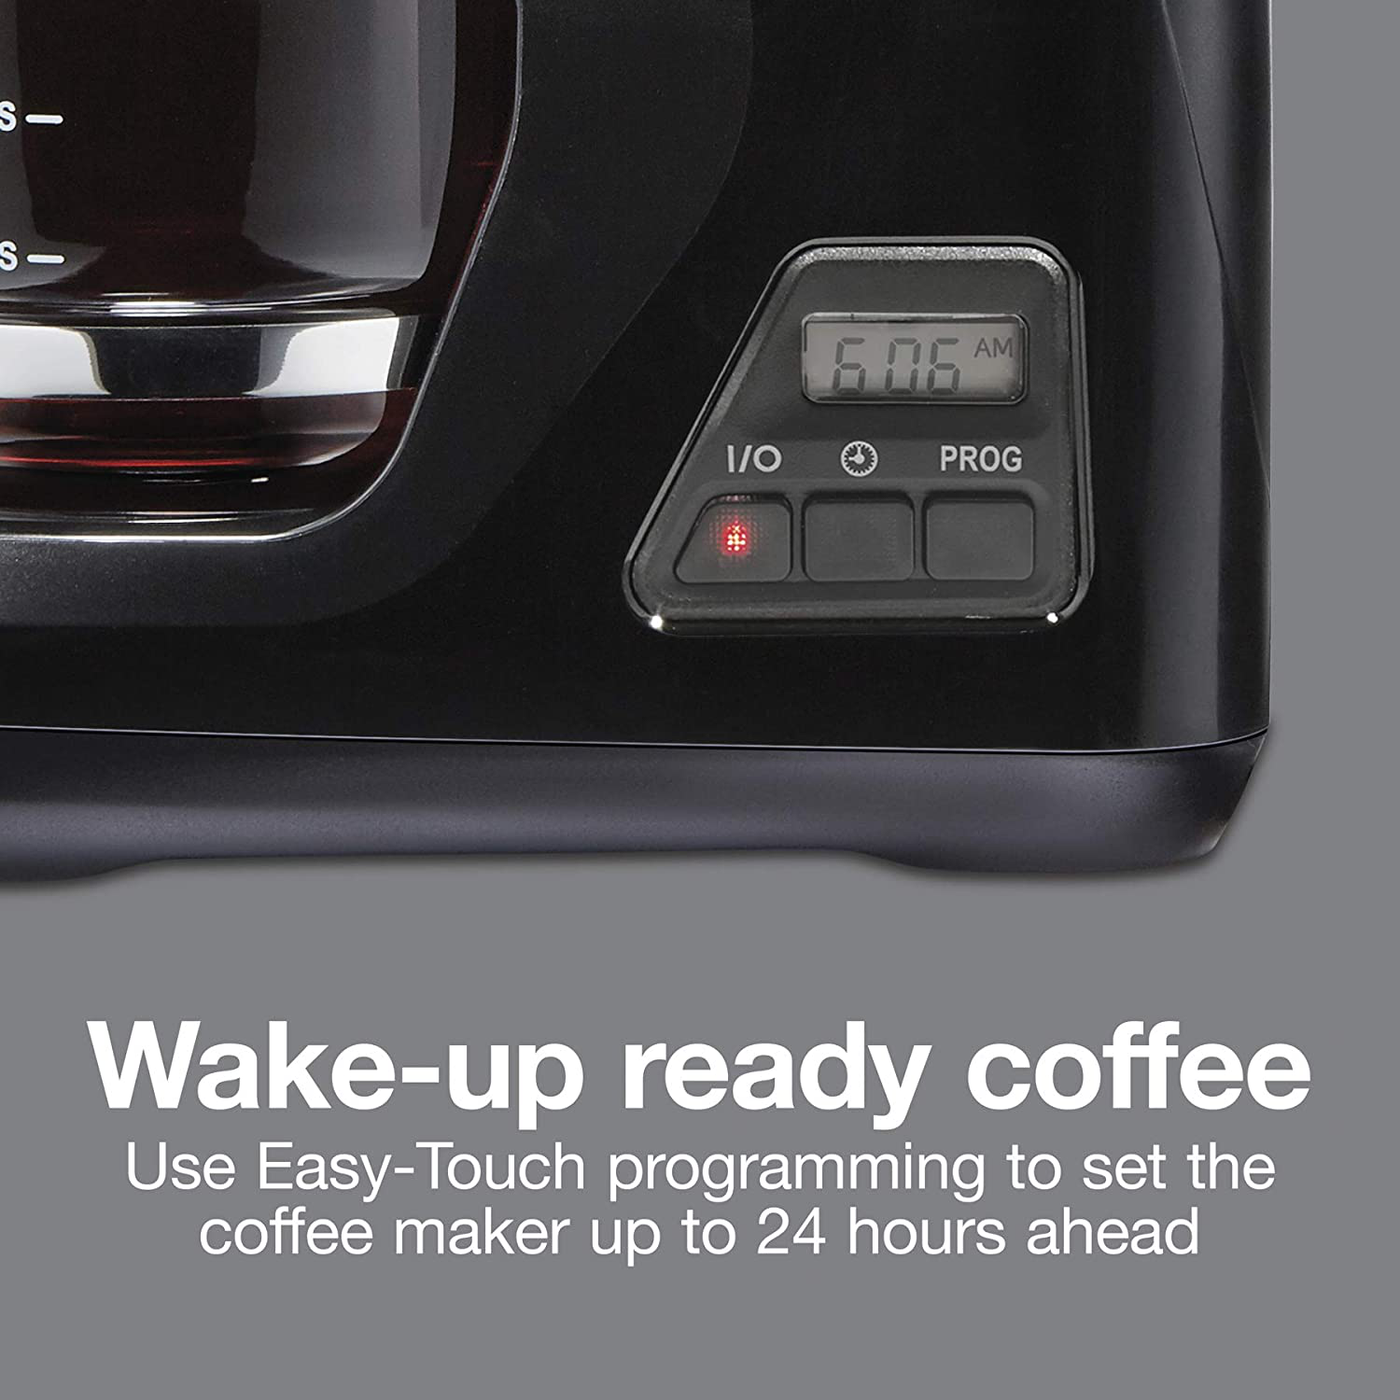 Proctor Silex FrontFill Compact 12 Cup Programmable Coffee Maker, Glass Carafe, Black (43685PS)